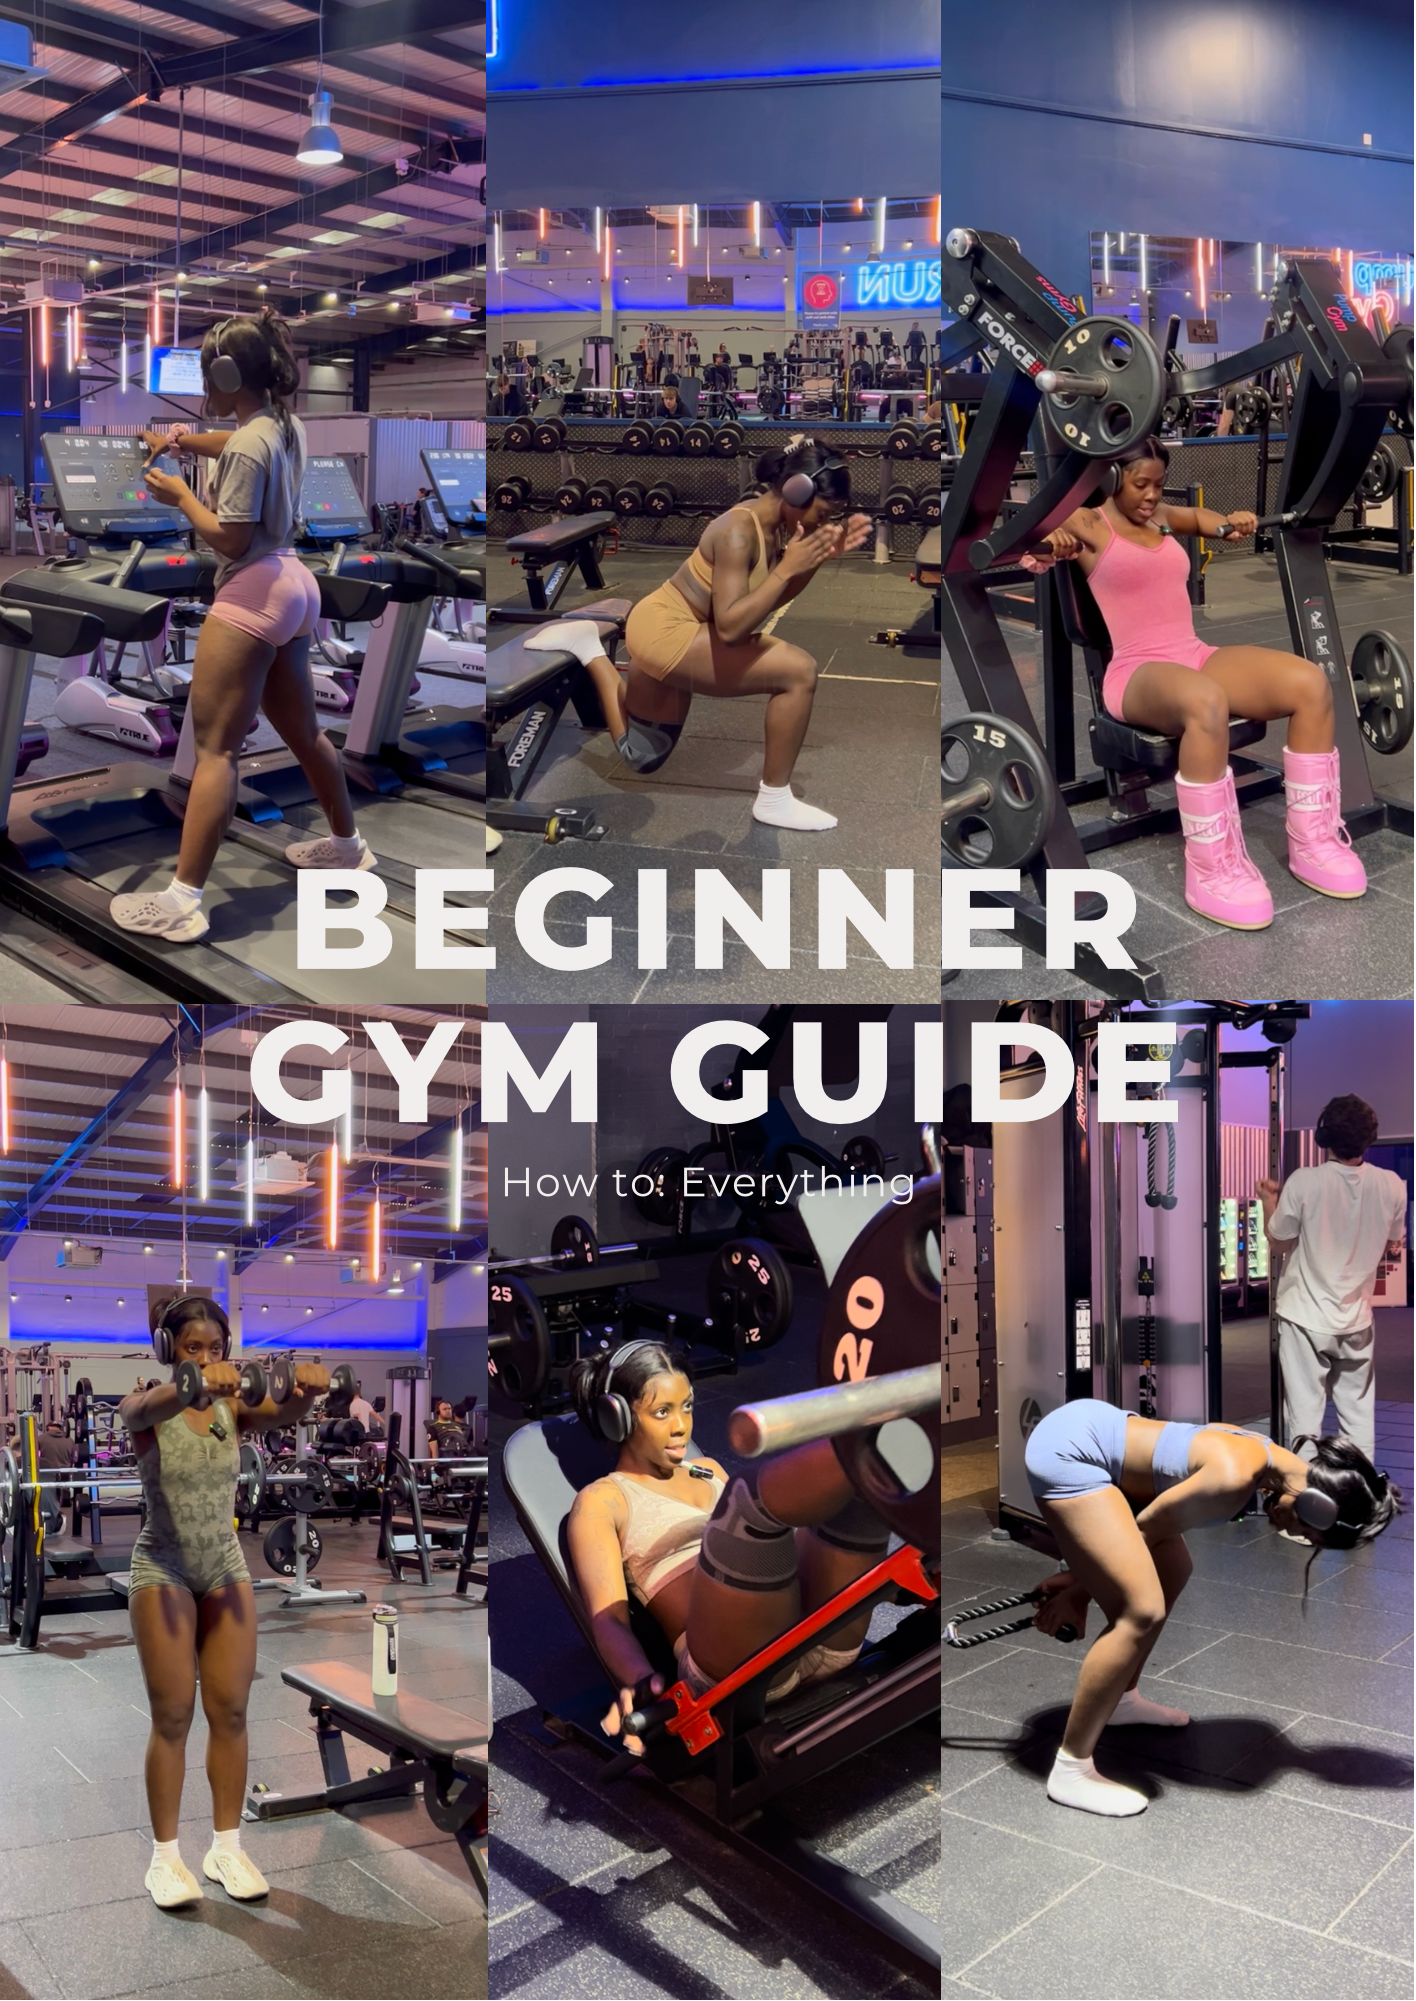 The Beginner Guide To The Gym